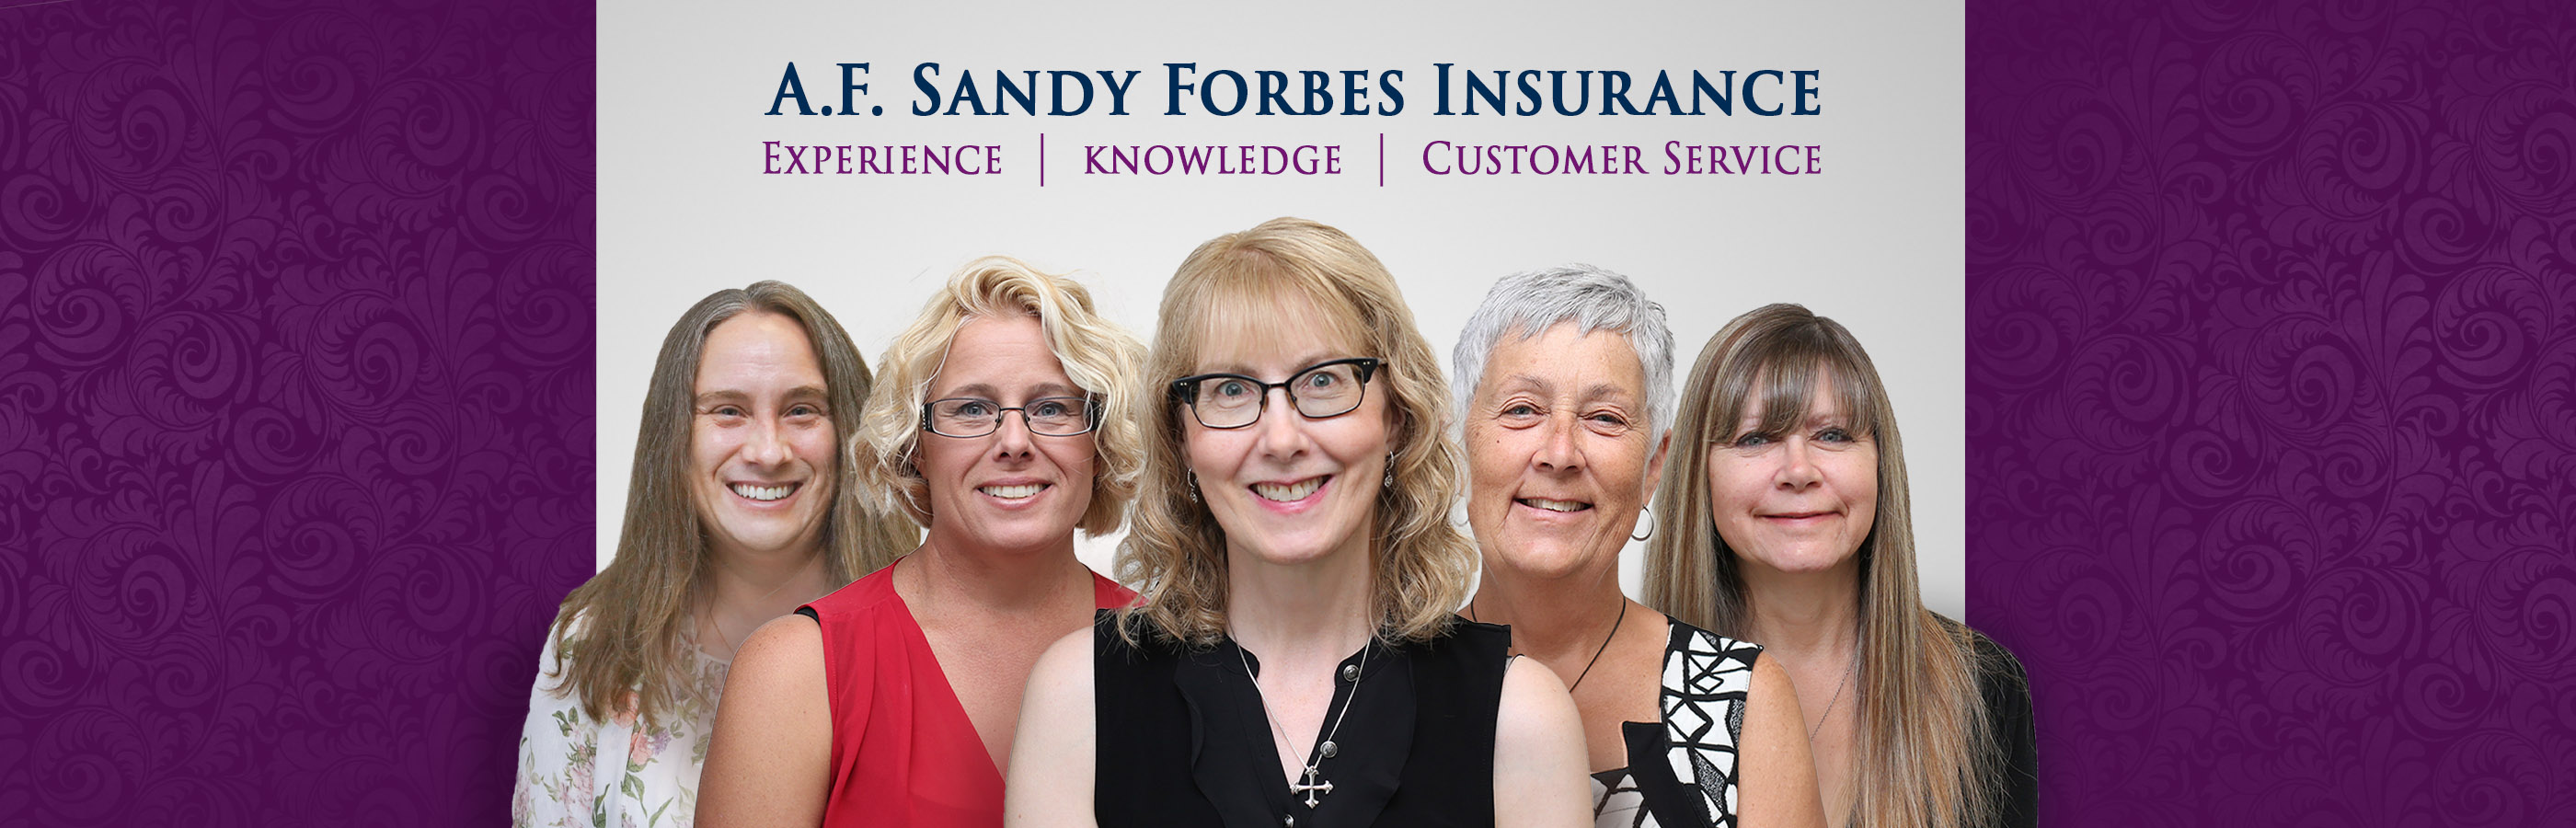 Forbes Insurance Team